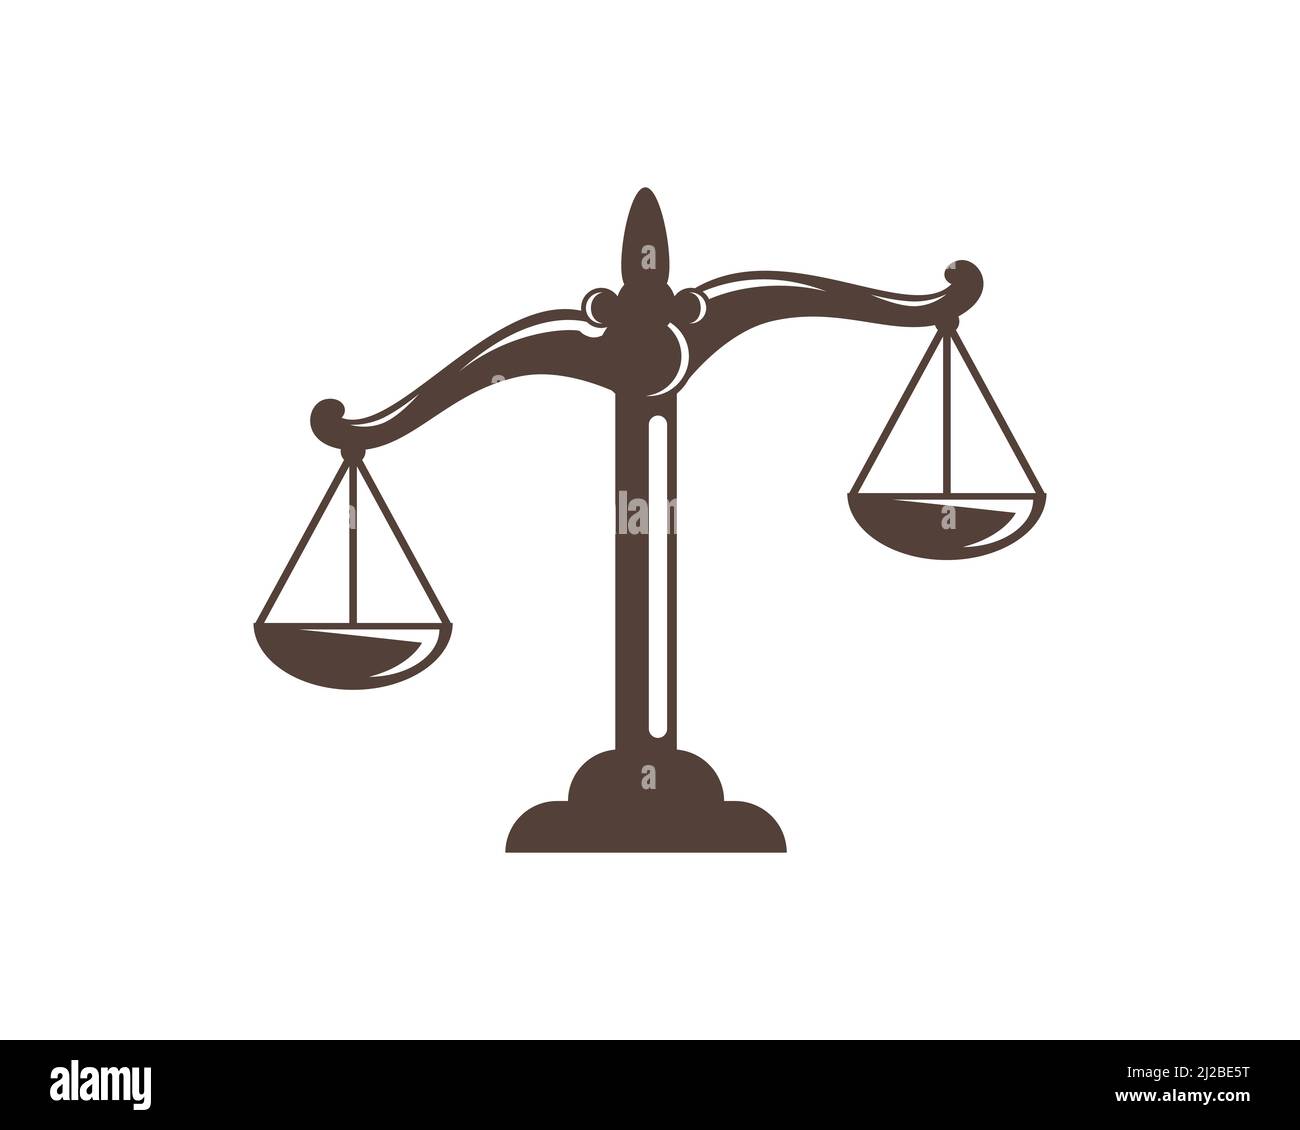 Injustice, Judgement, Law Firm, Lawyer and Law Consultant Symbol Stock Vector